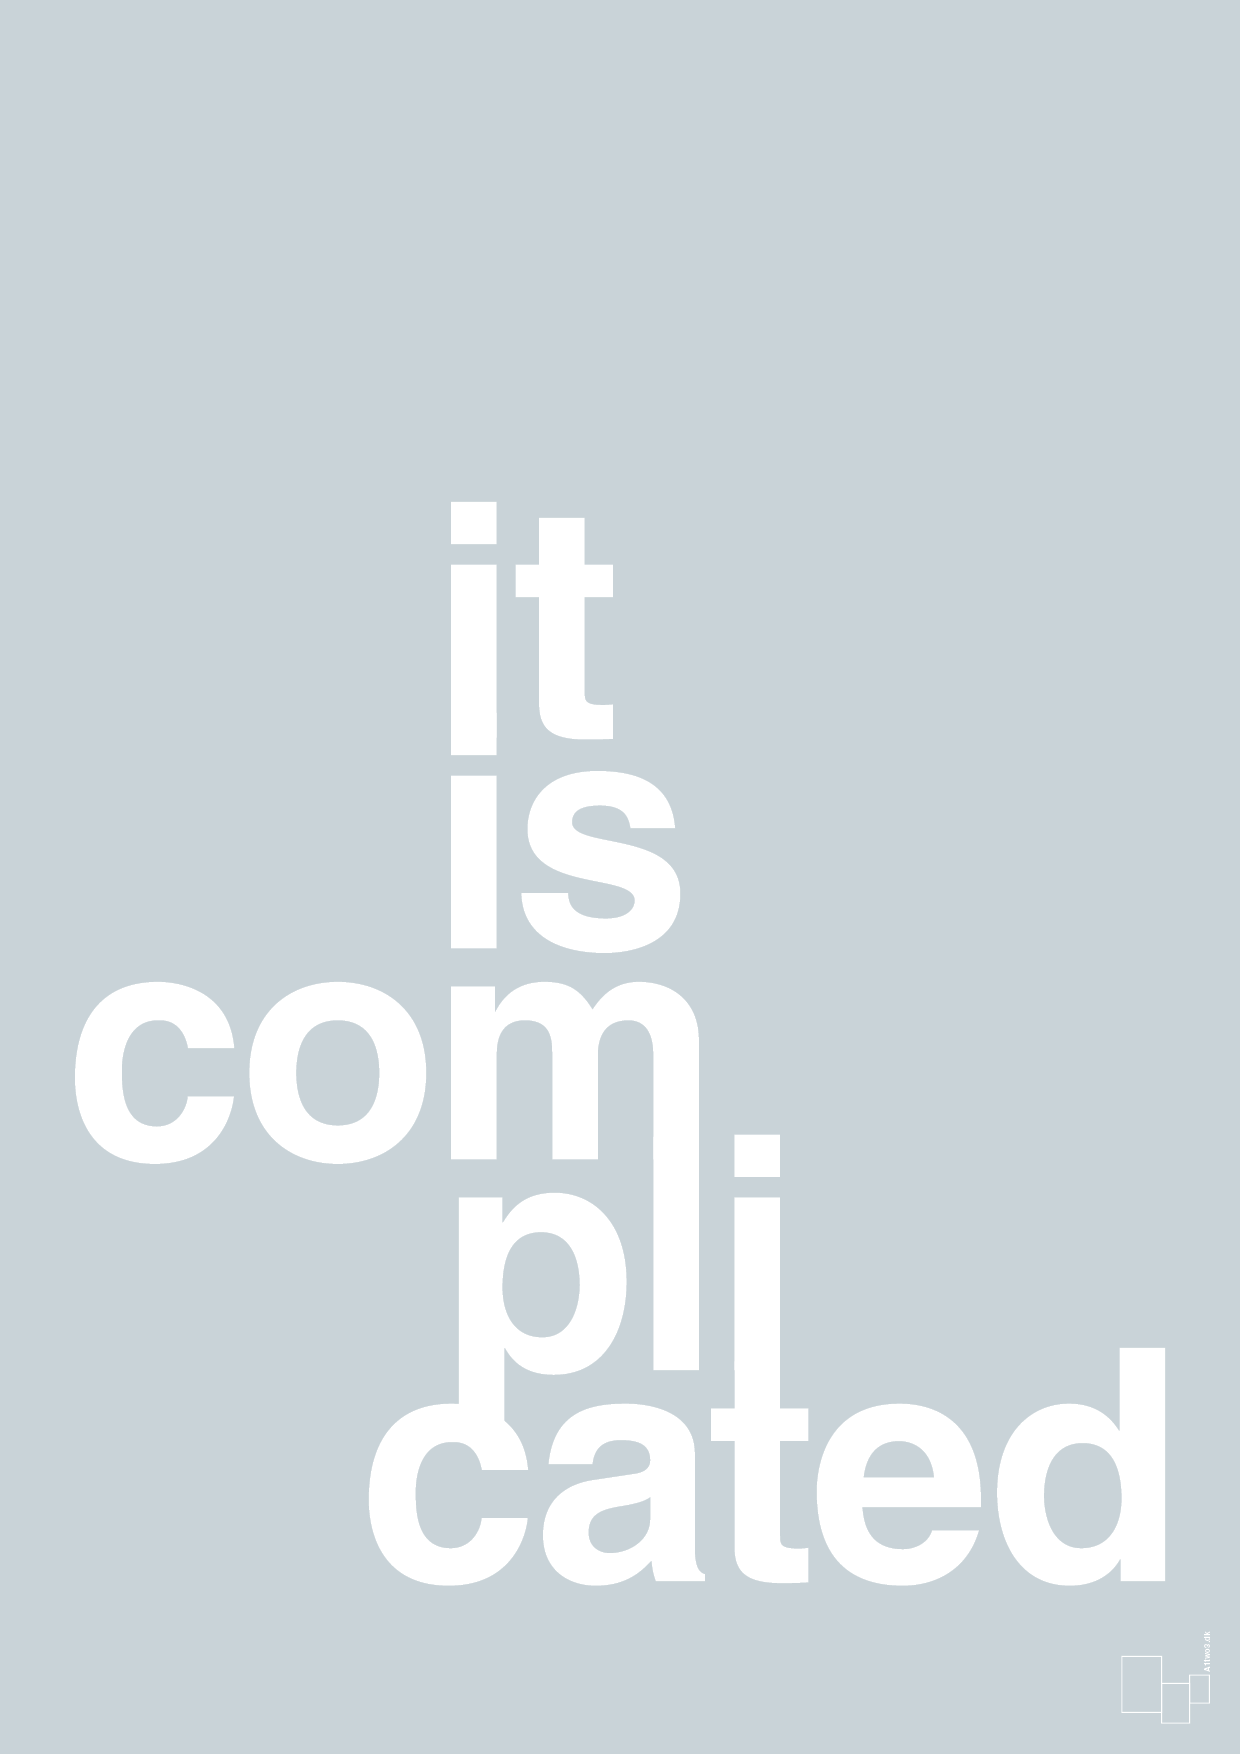 it is complicated - Plakat med Ordsprog i Light Drizzle